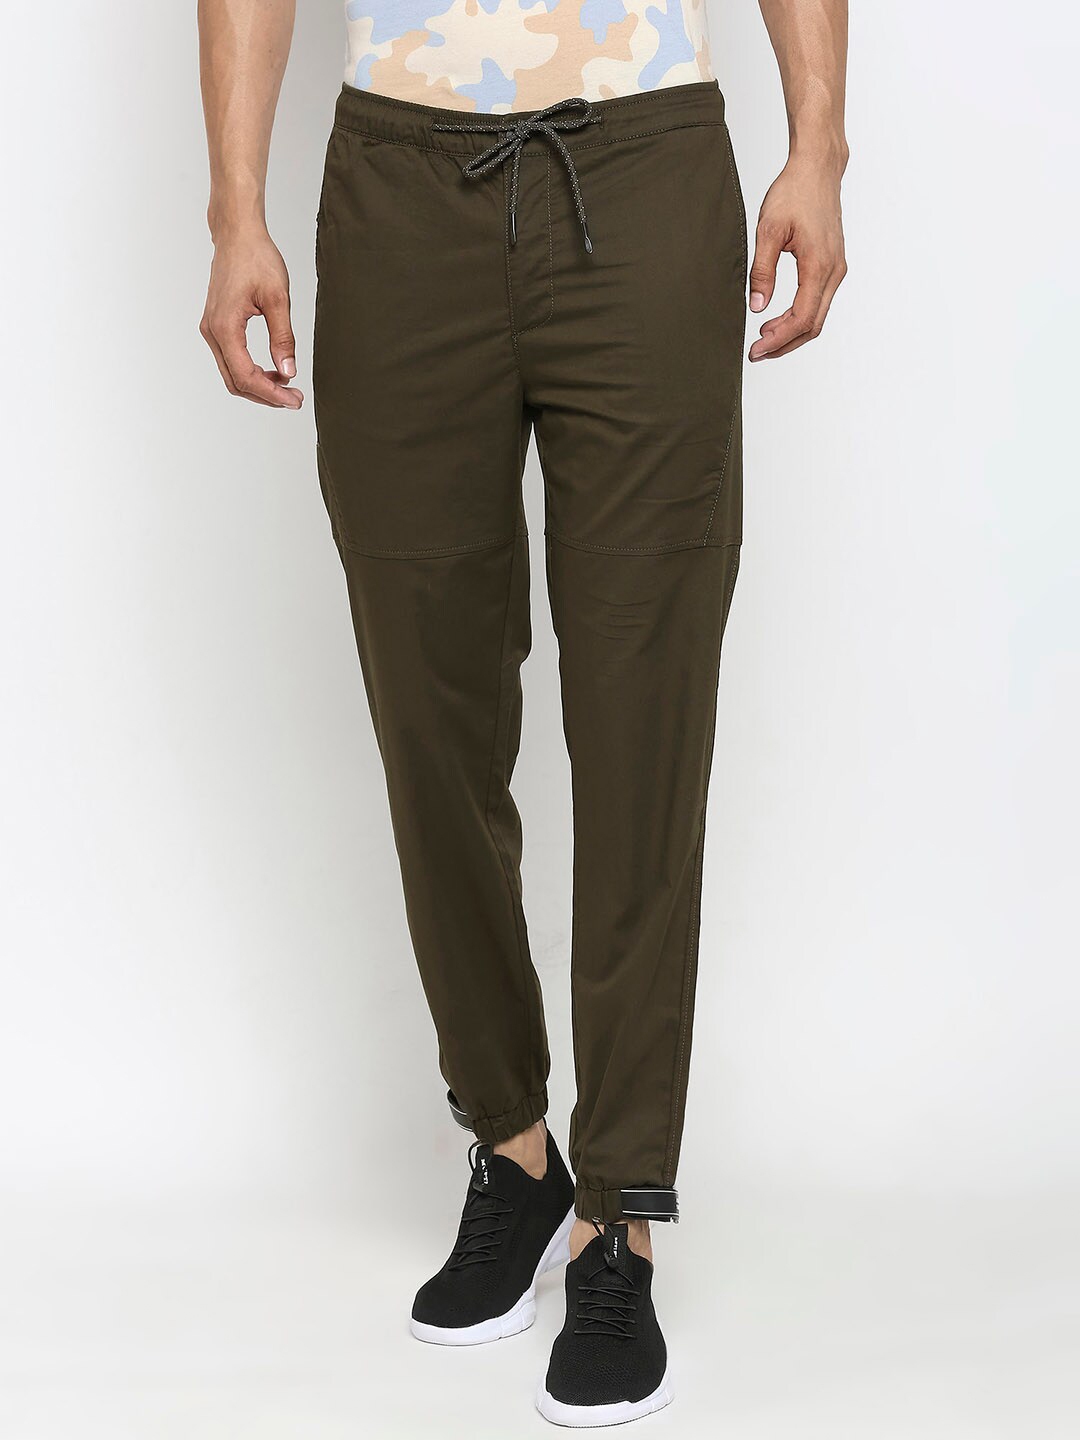 Buy Mufti Men Olive Green Slim Fit Trousers - Trousers for Men 15000974 ...